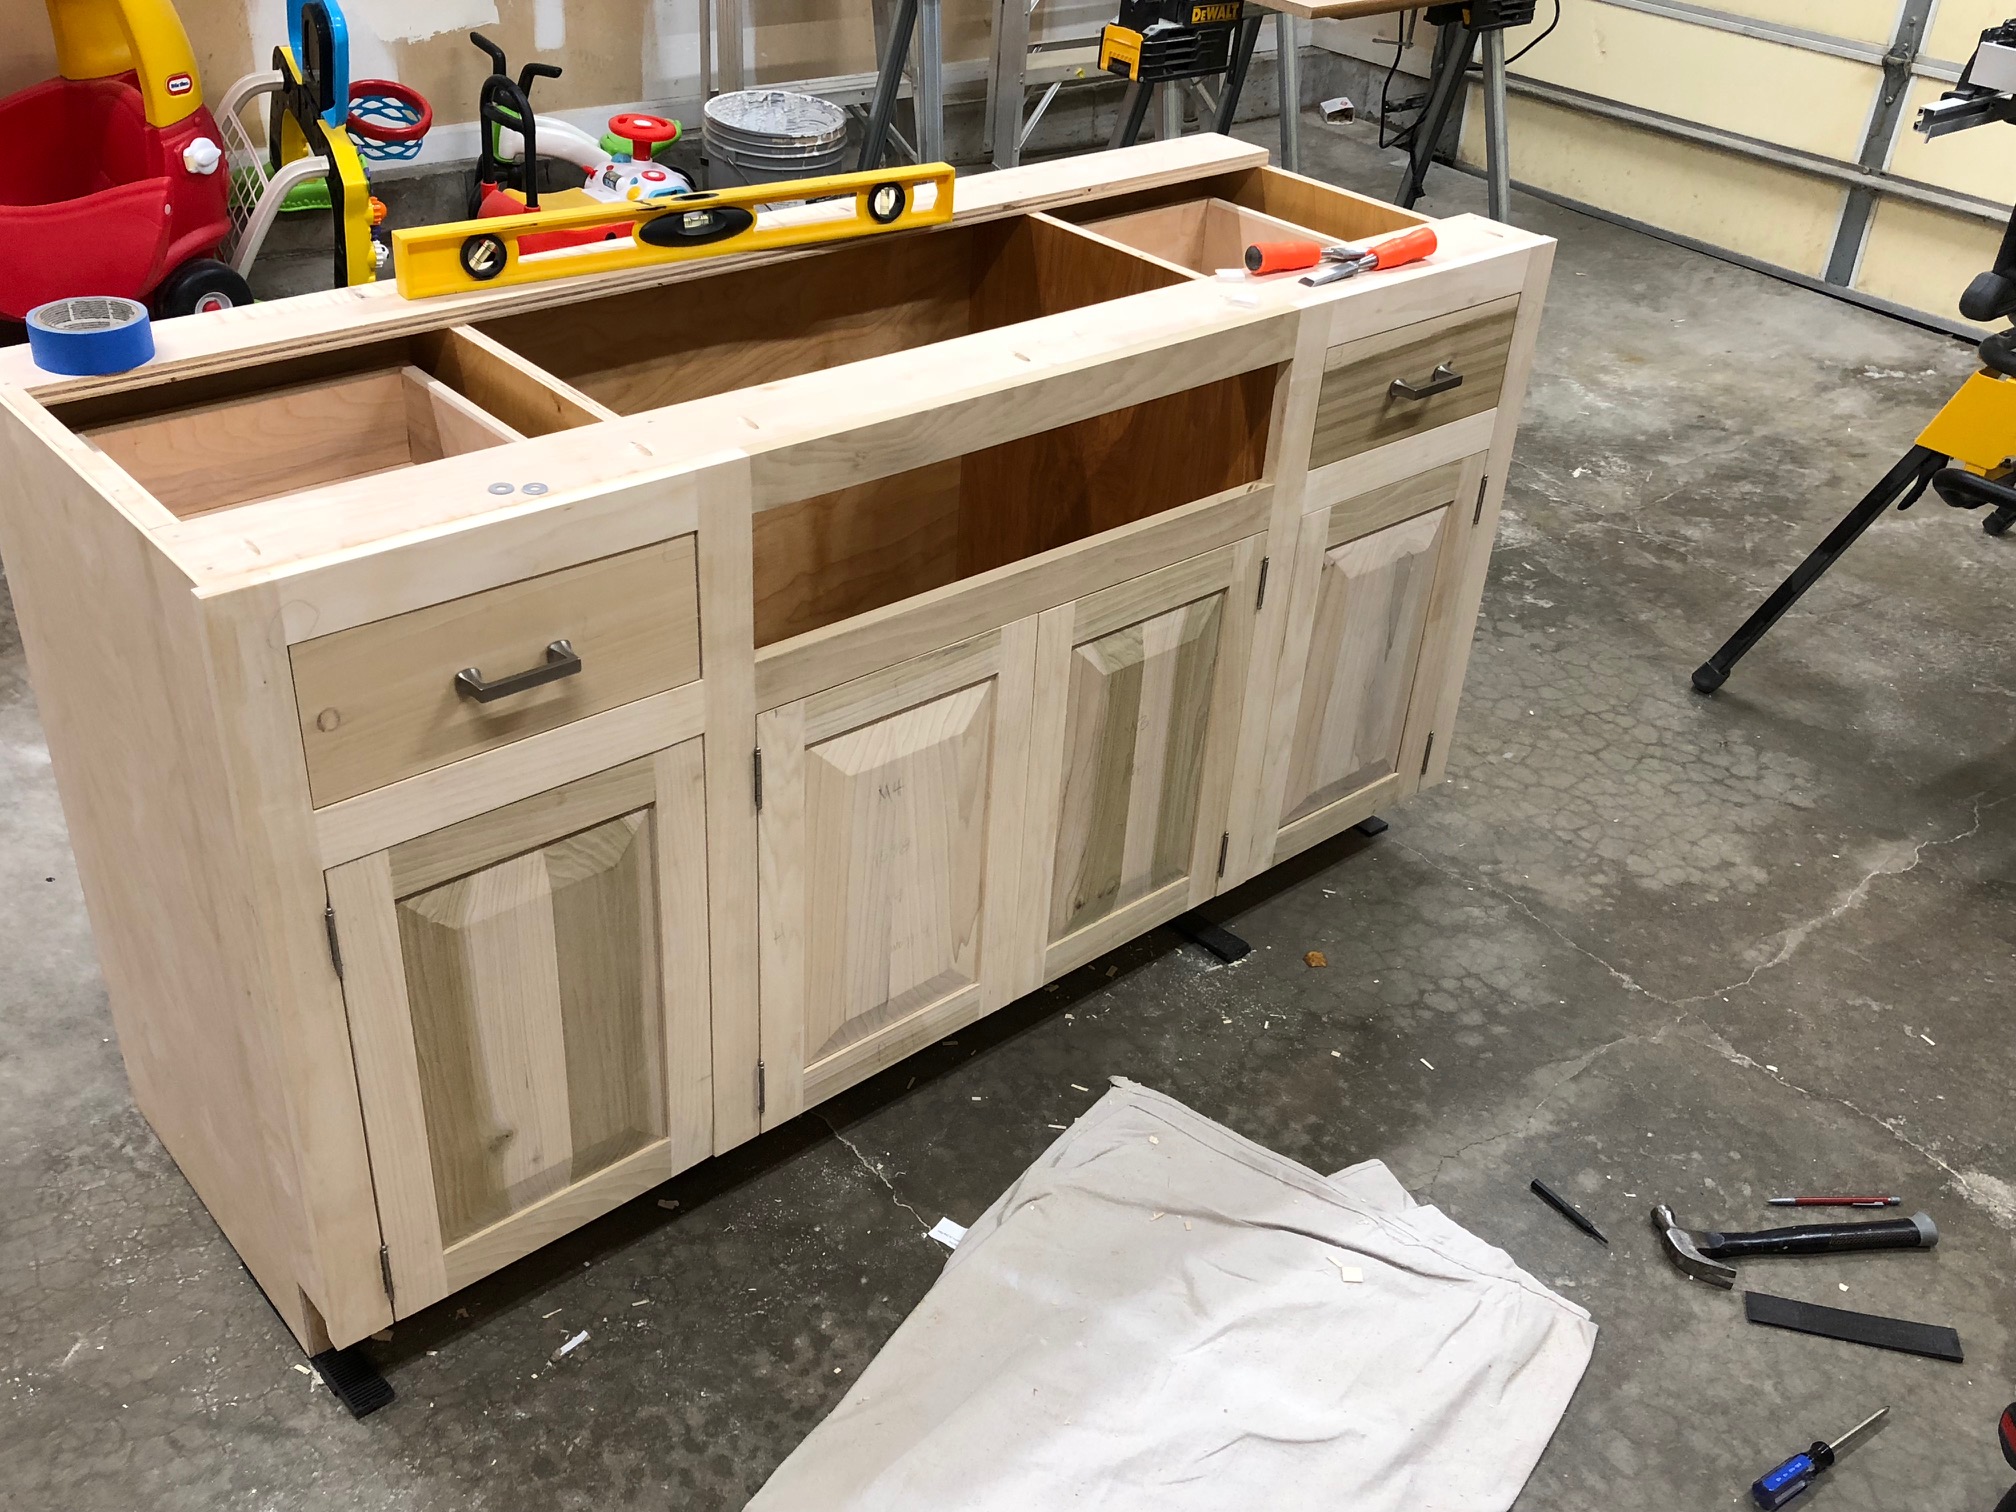 Kitchen Cabinets Baileylineroad, How To Build A Kitchen Cupboard From Scratch